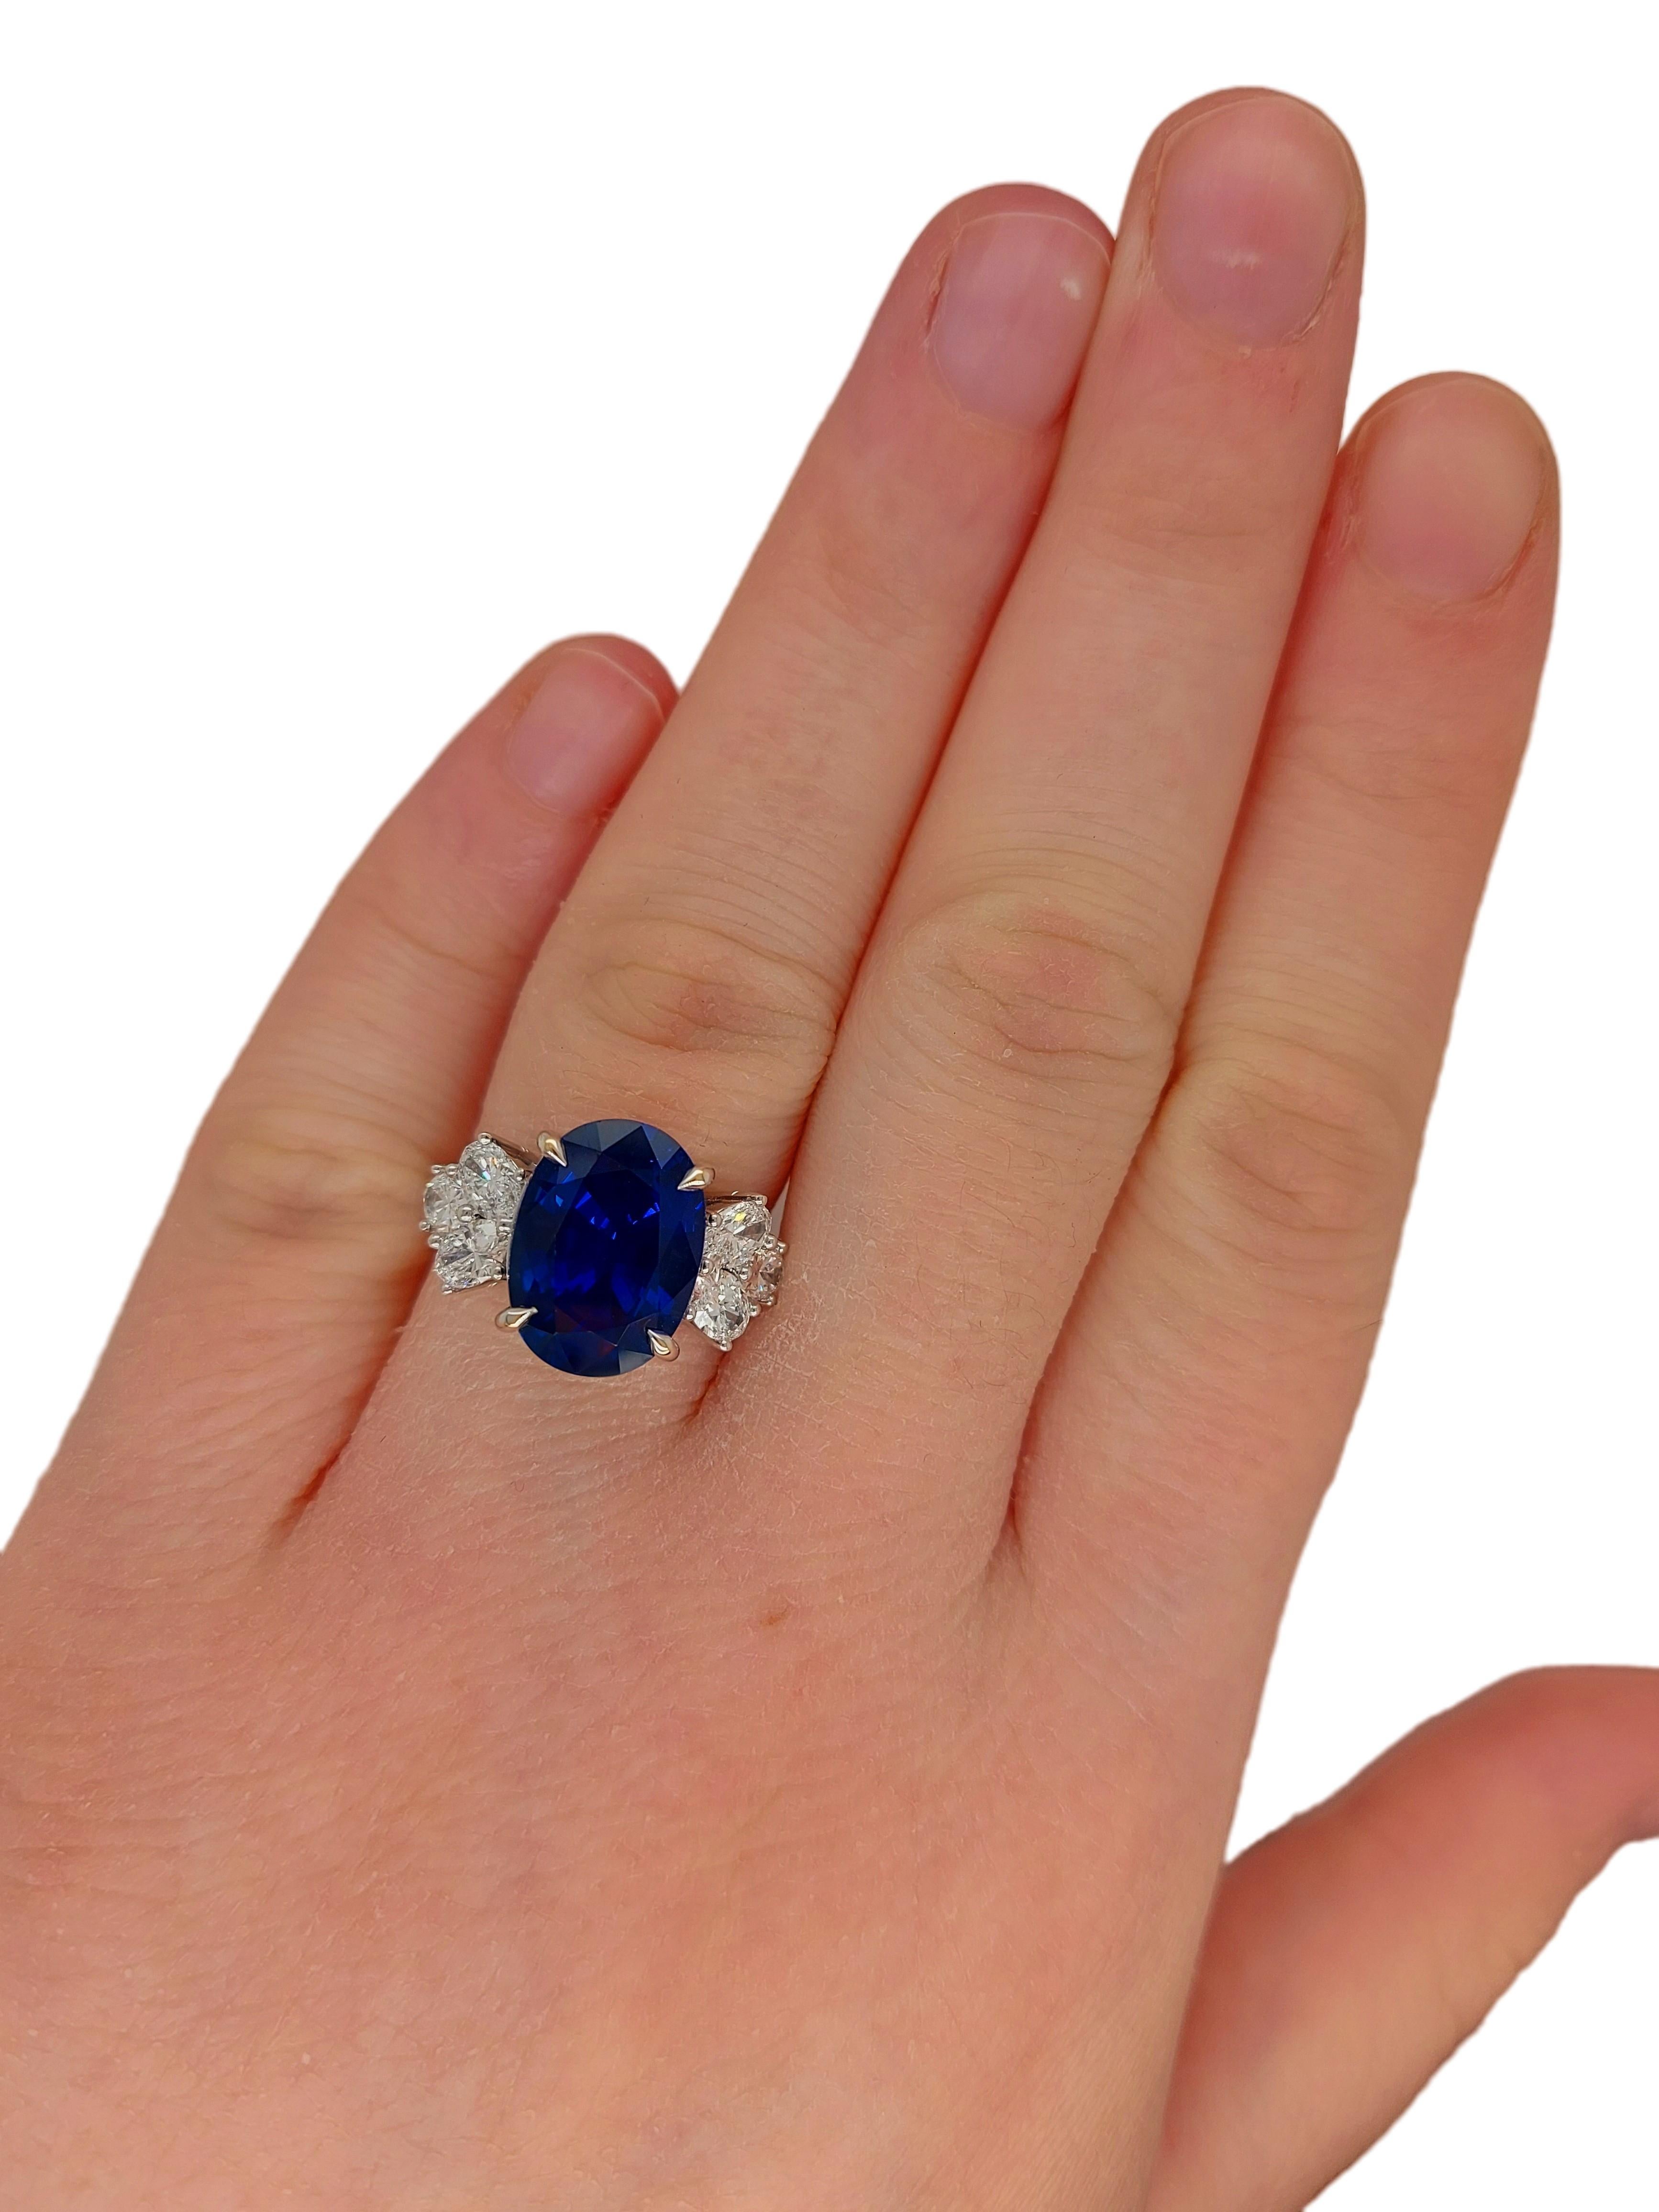 18 Karat White Gold Ring Set with a 7 Carat Sapphire and Diamonds 12